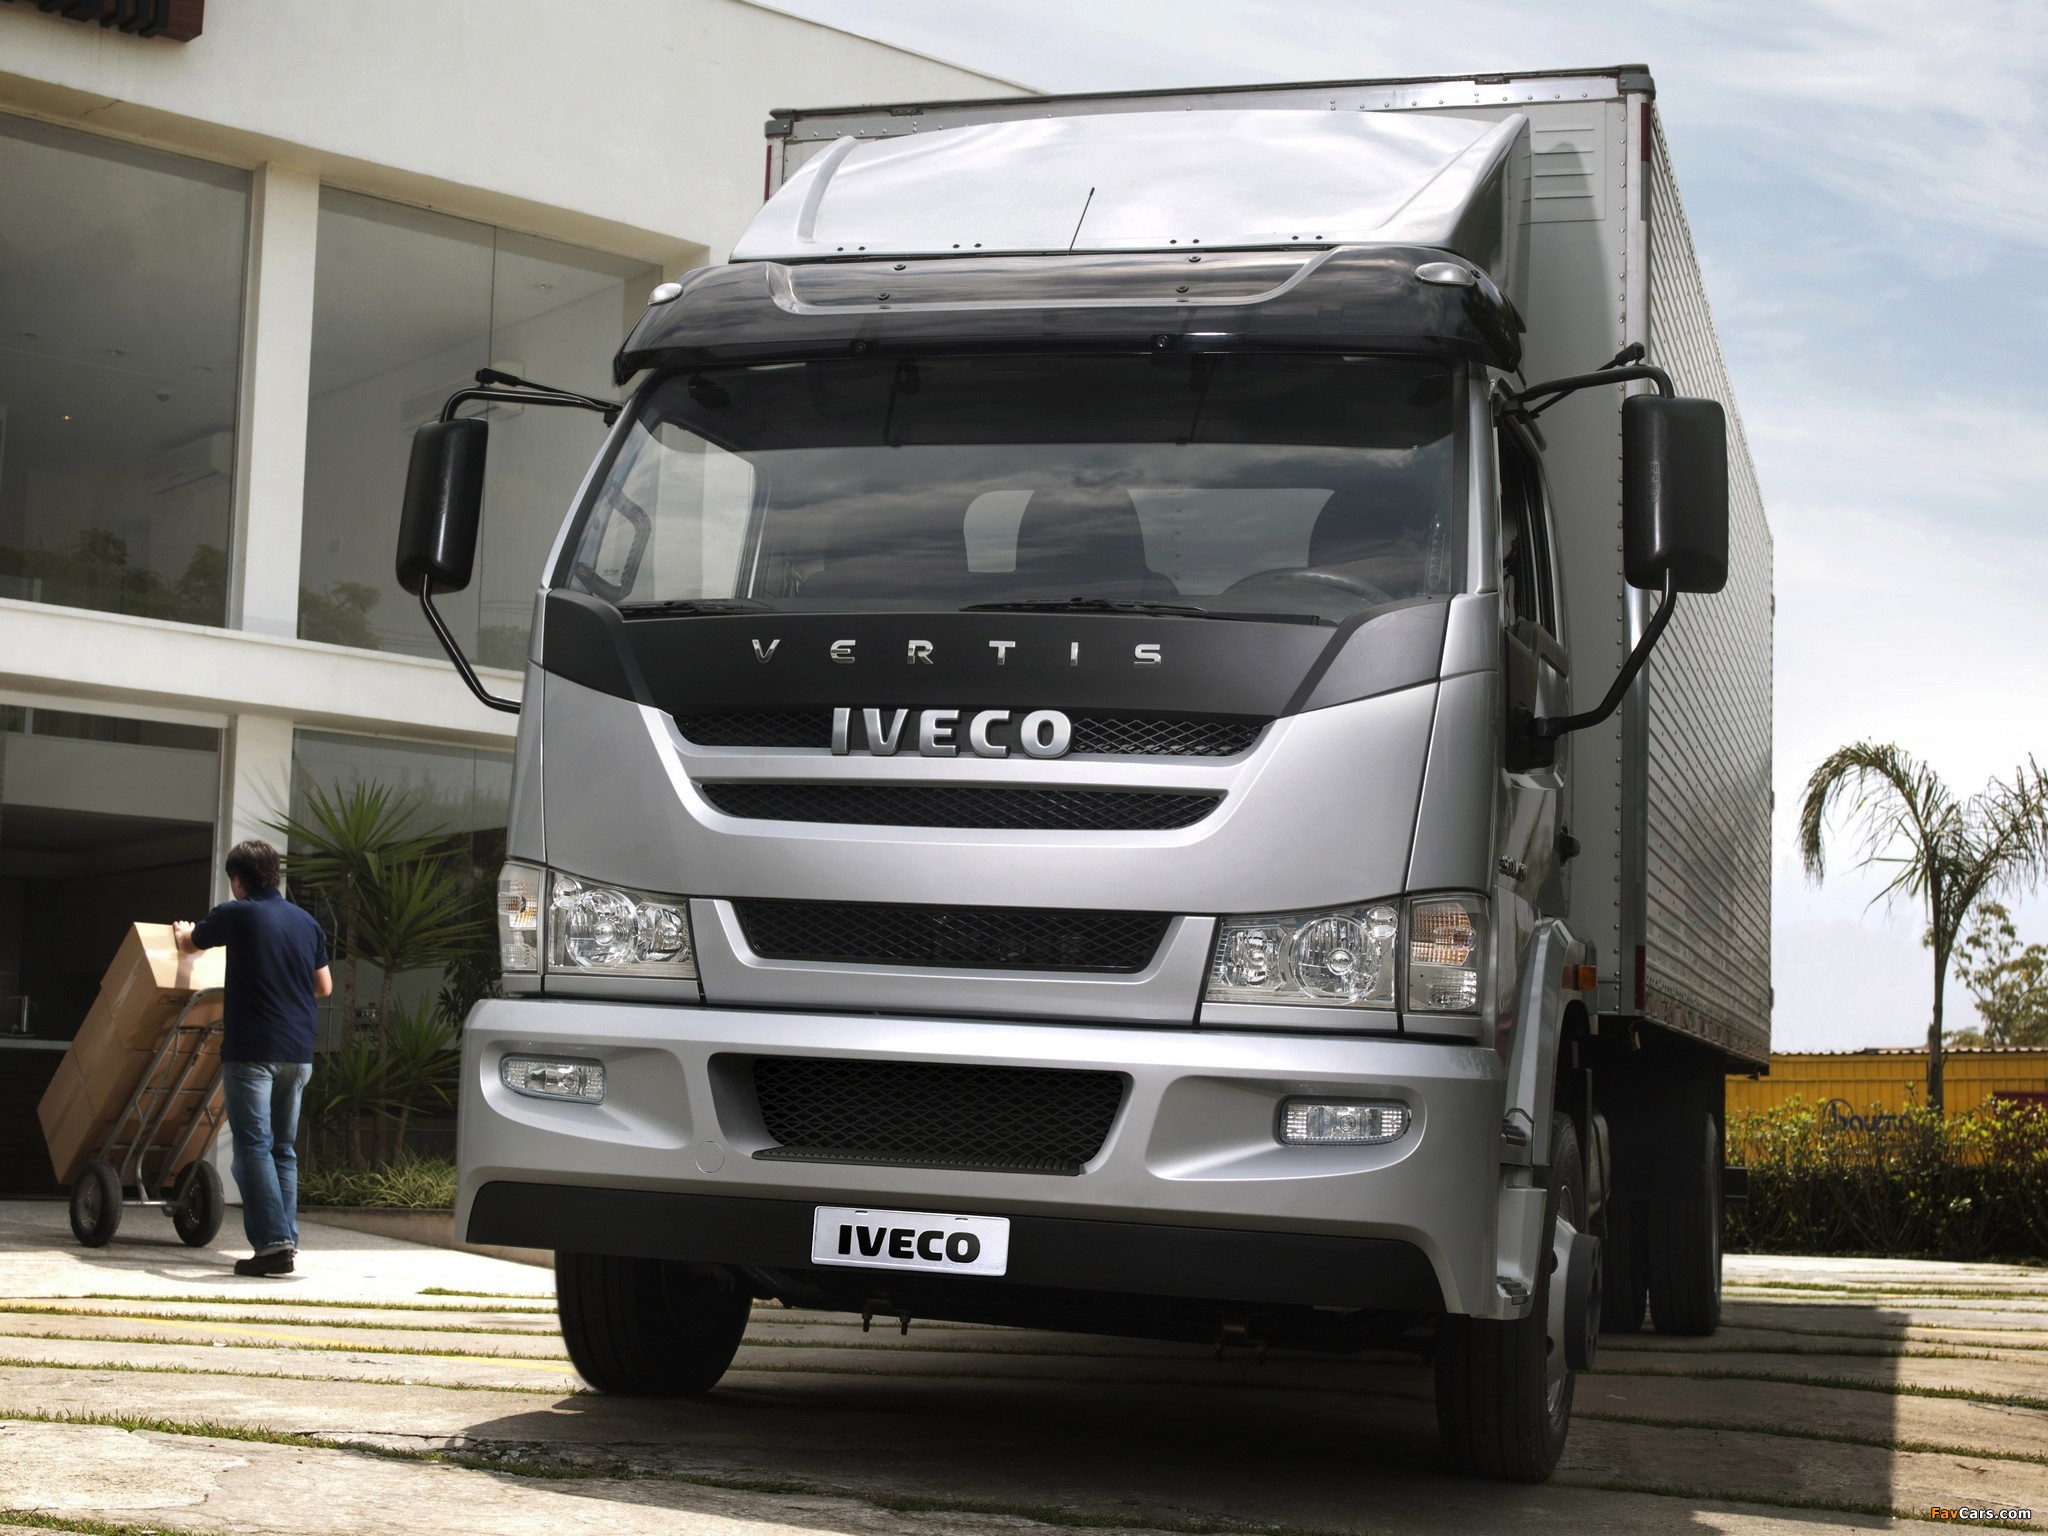 High Quality Tuning Files Iveco Vertis 90V19 3.9L I4 185hp